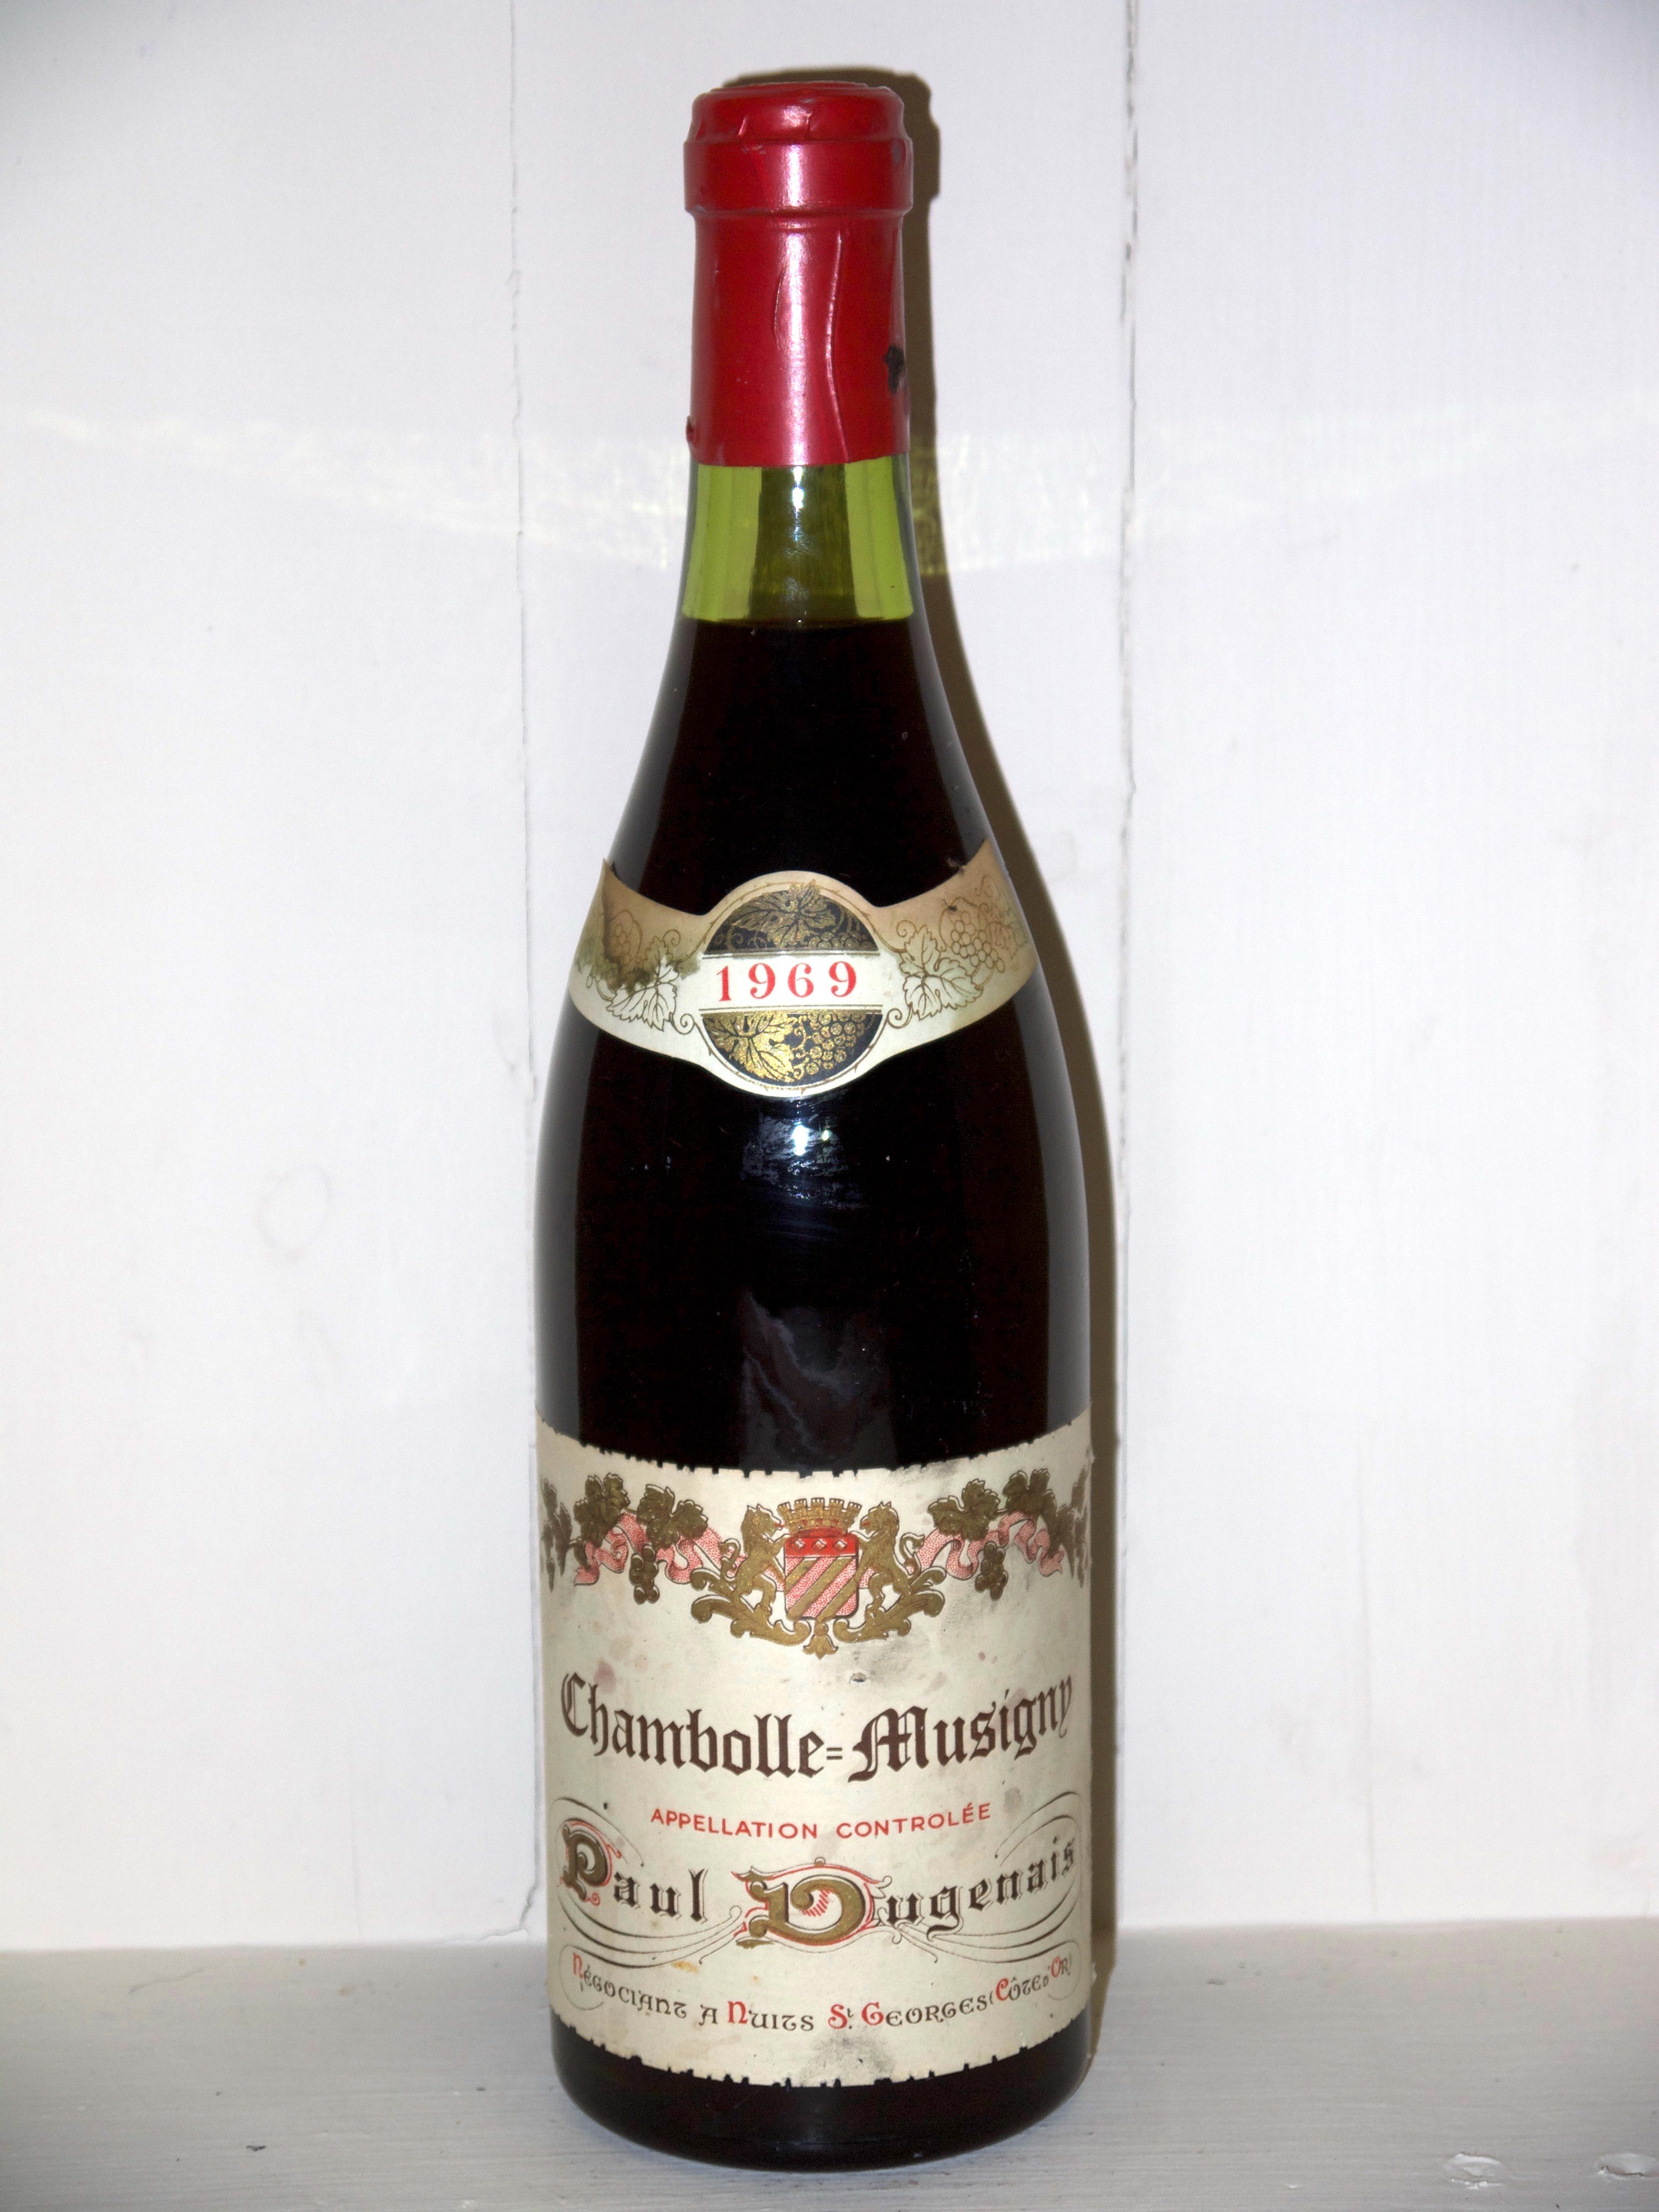 Chambolle-Musigny 1969 Paul Dugenais - great wine Bottles in ...